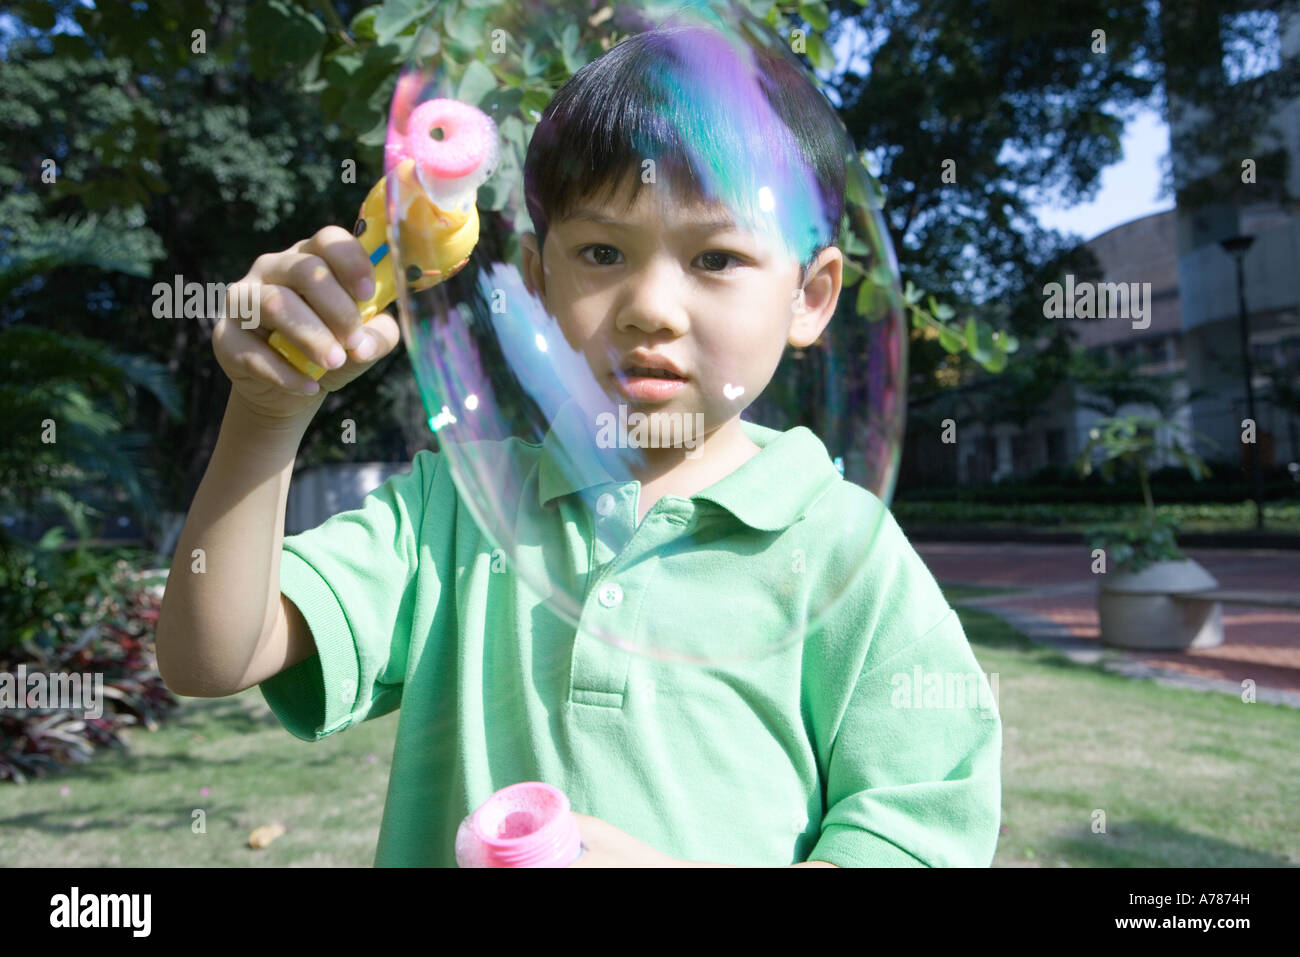 Boy making bubbles with bubble wand Stock Photo